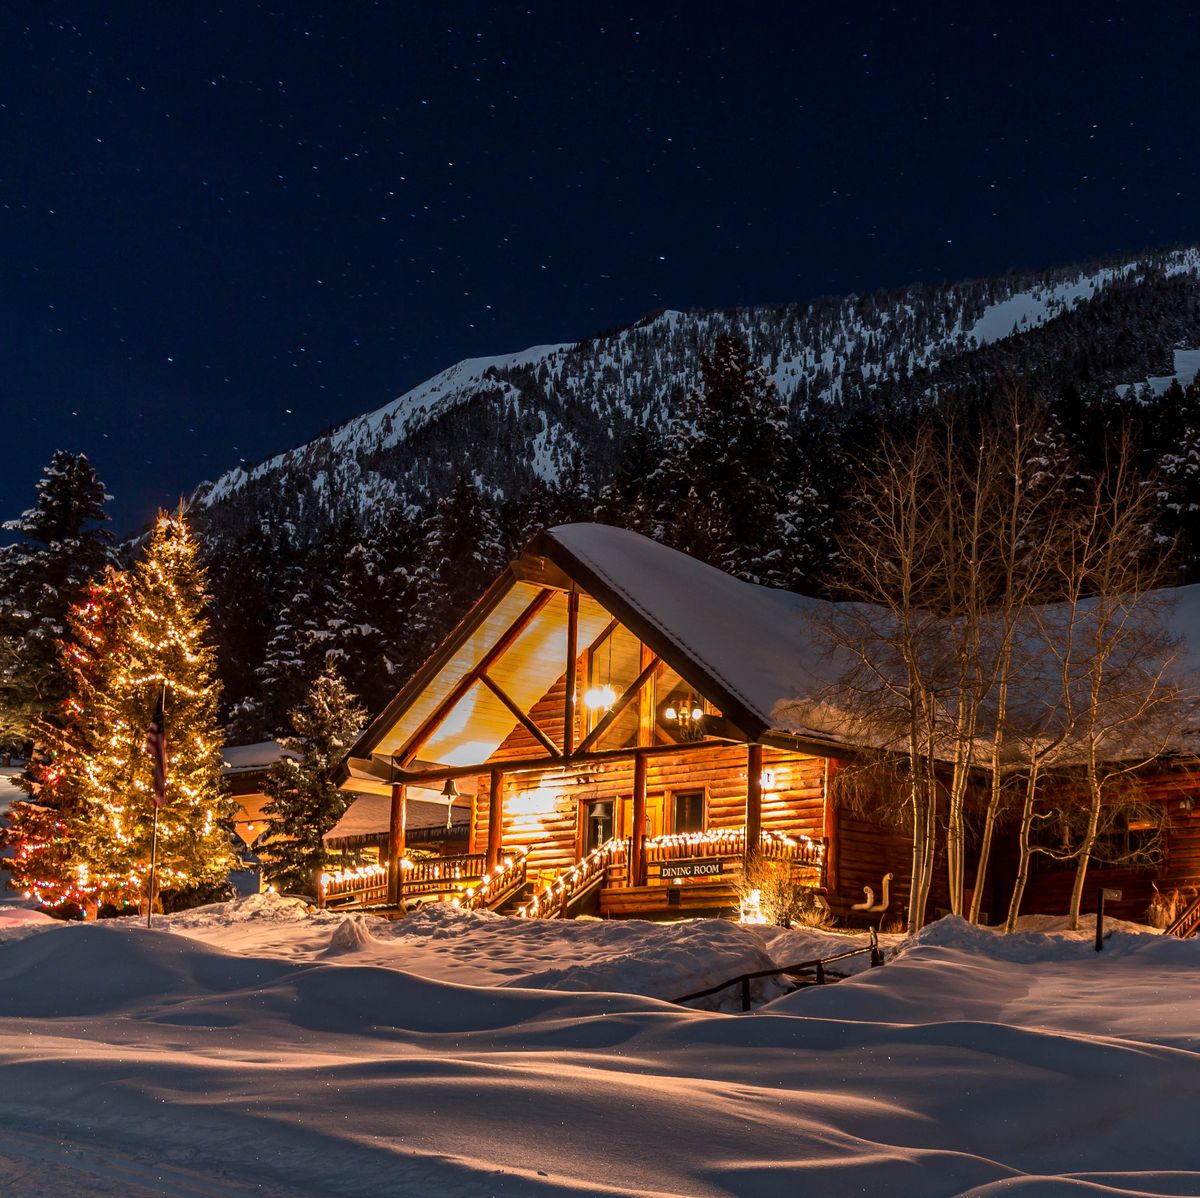 https://hips.hearstapps.com/hmg-prod/images/cozy-winter-cabins-1603479244.jpg?crop=0.660xw:1.00xh;0,0&resize=1200:*